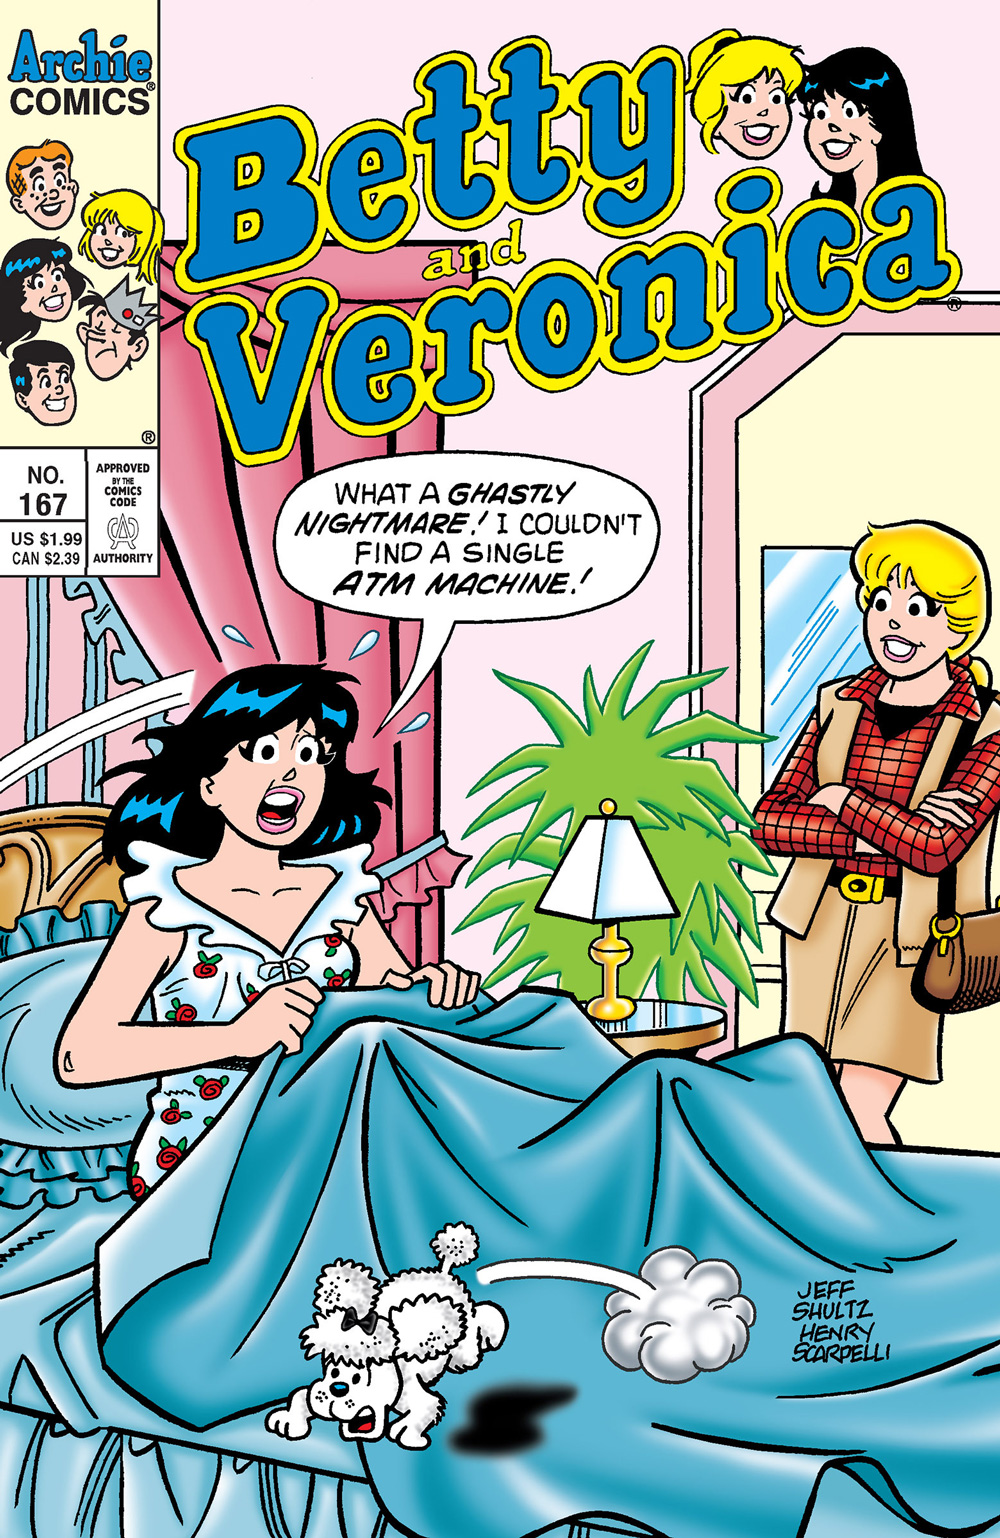 Veronica wakes up in her bedroom with a start, saying she had a nightmare that she couldn't find an ATM machine. Betty looks on smiling, and Veronica's poodle jumps off the bed.